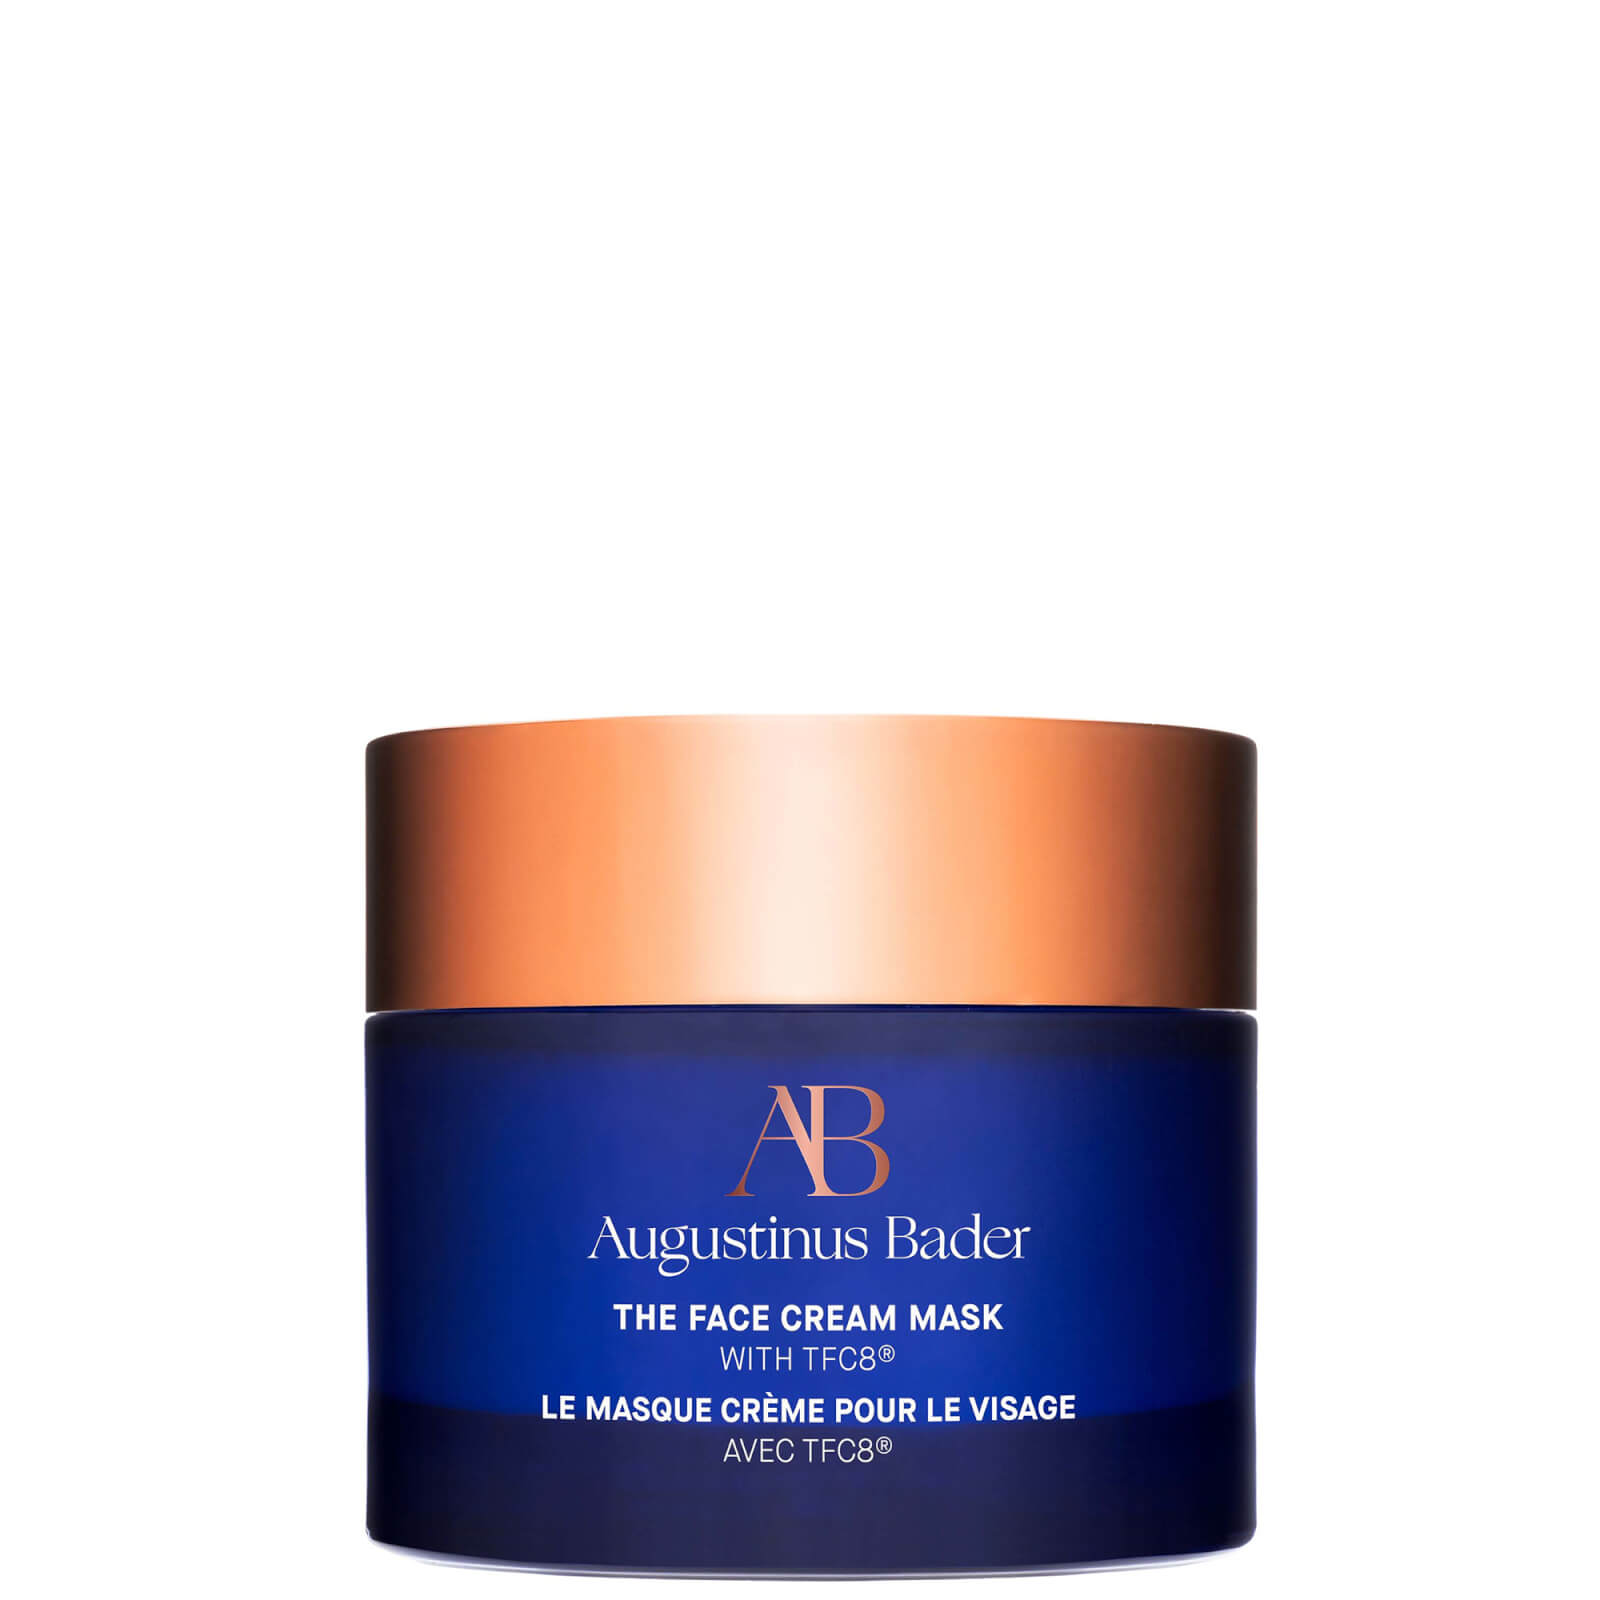 Shop Augustinus Bader The Face Cream Mask 50ml (various Options) - 50ml